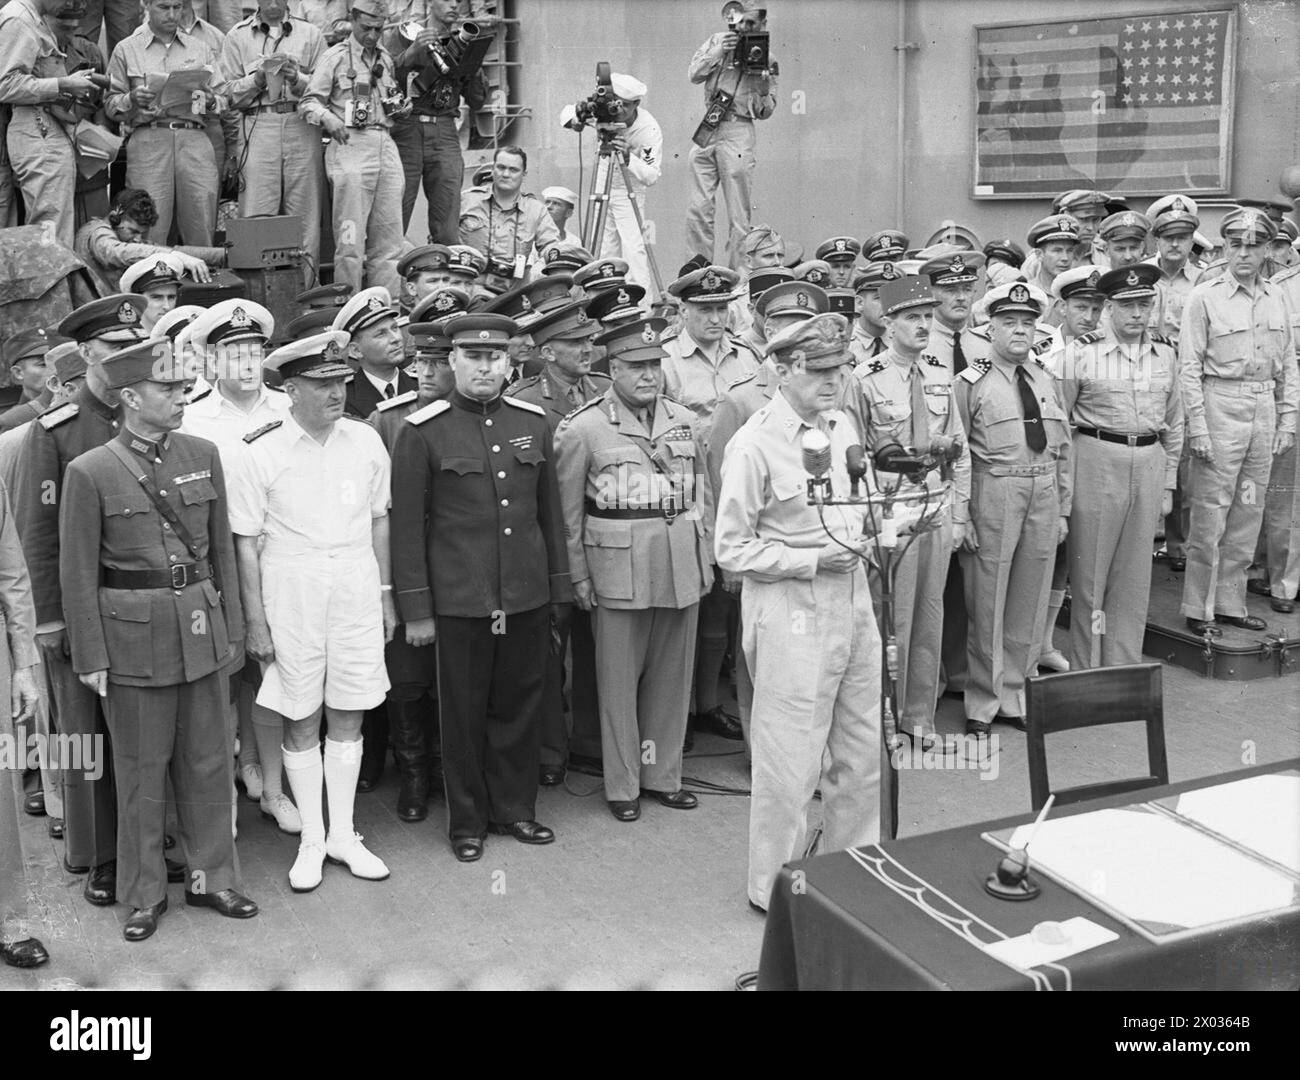 JAPANESE SURRENDER AT TOKYO BAY, 2 SEPTEMBER 1945 - General of the Army, Douglas MacArthur reads the surrender terms to the Japanese representatives on board USS MISSOURI in Tokyo Bay  MacArthur, Douglas, United States Navy, USS Missouri, Battleship, (1944) Stock Photo